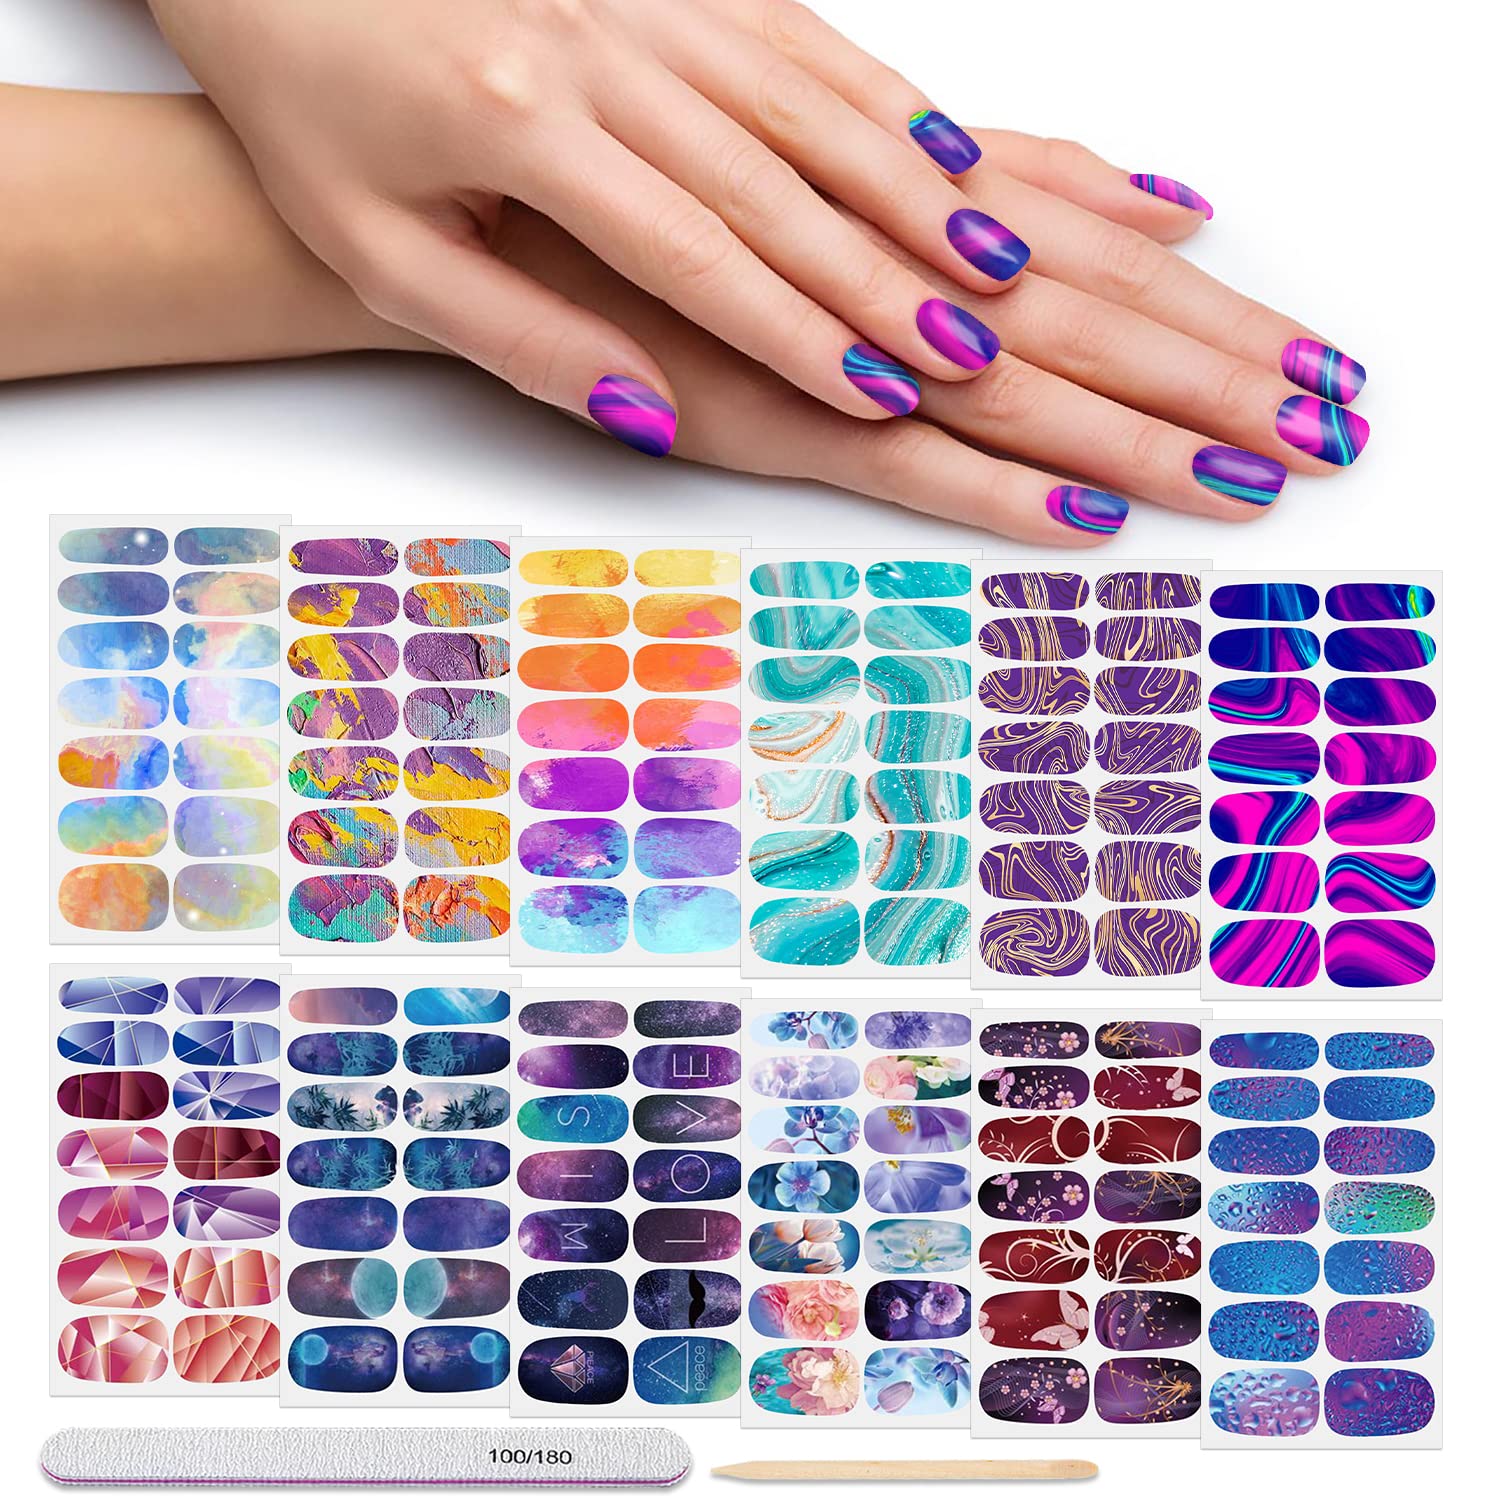 How To Make Nail Stickers Last - justpeachy.co - the official blog of Chia